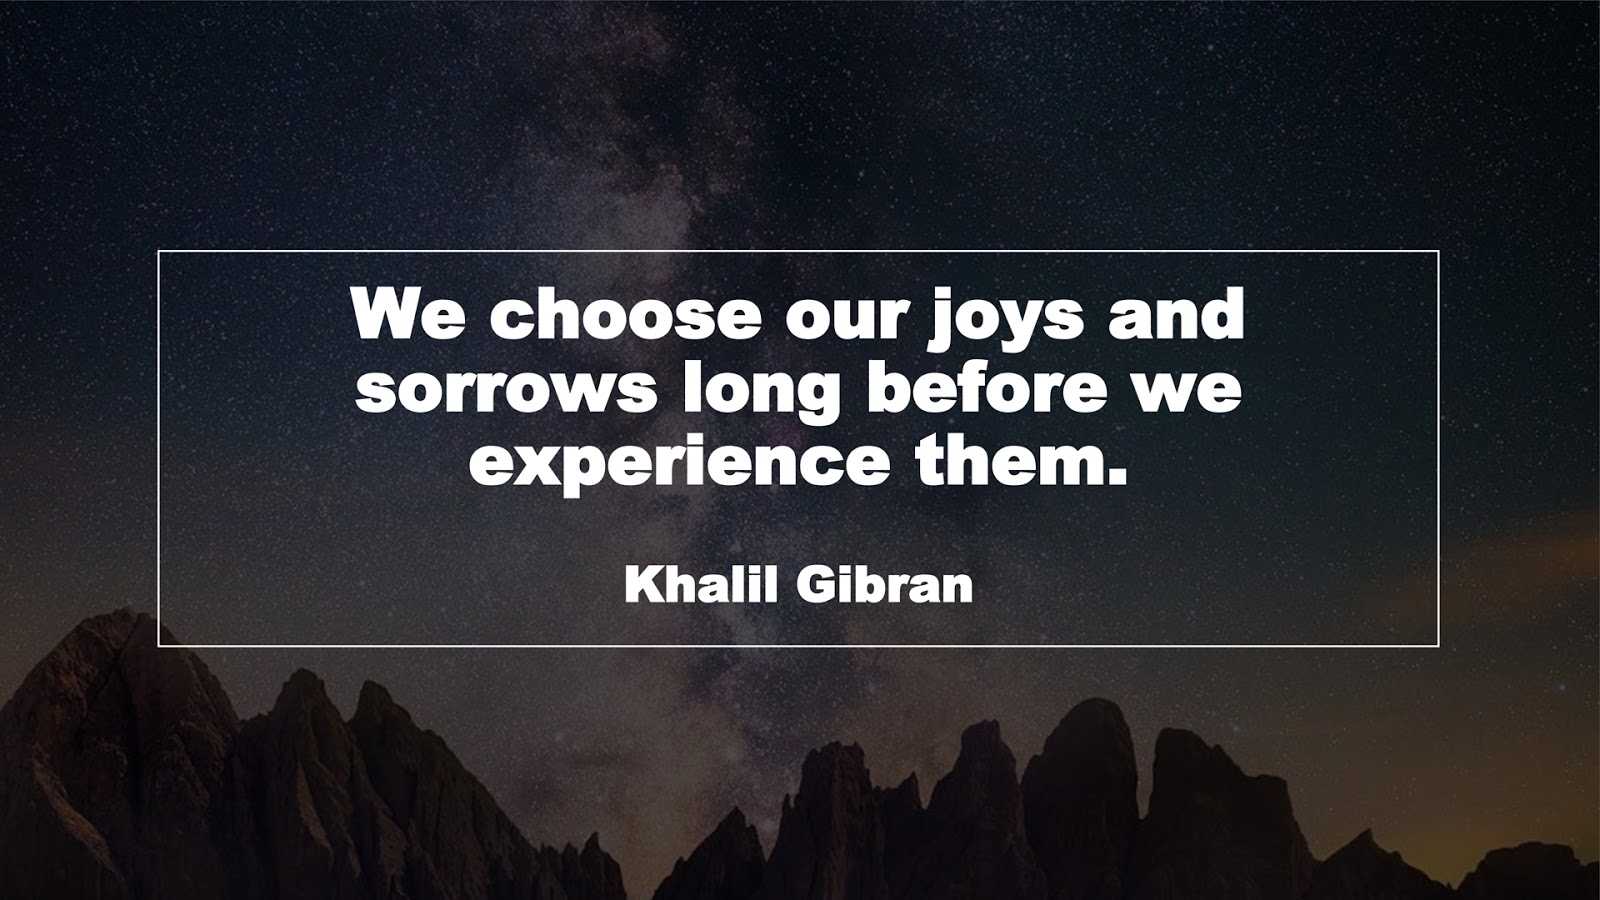 We choose our joys and sorrows long before we experience them. (Khalil Gibran)